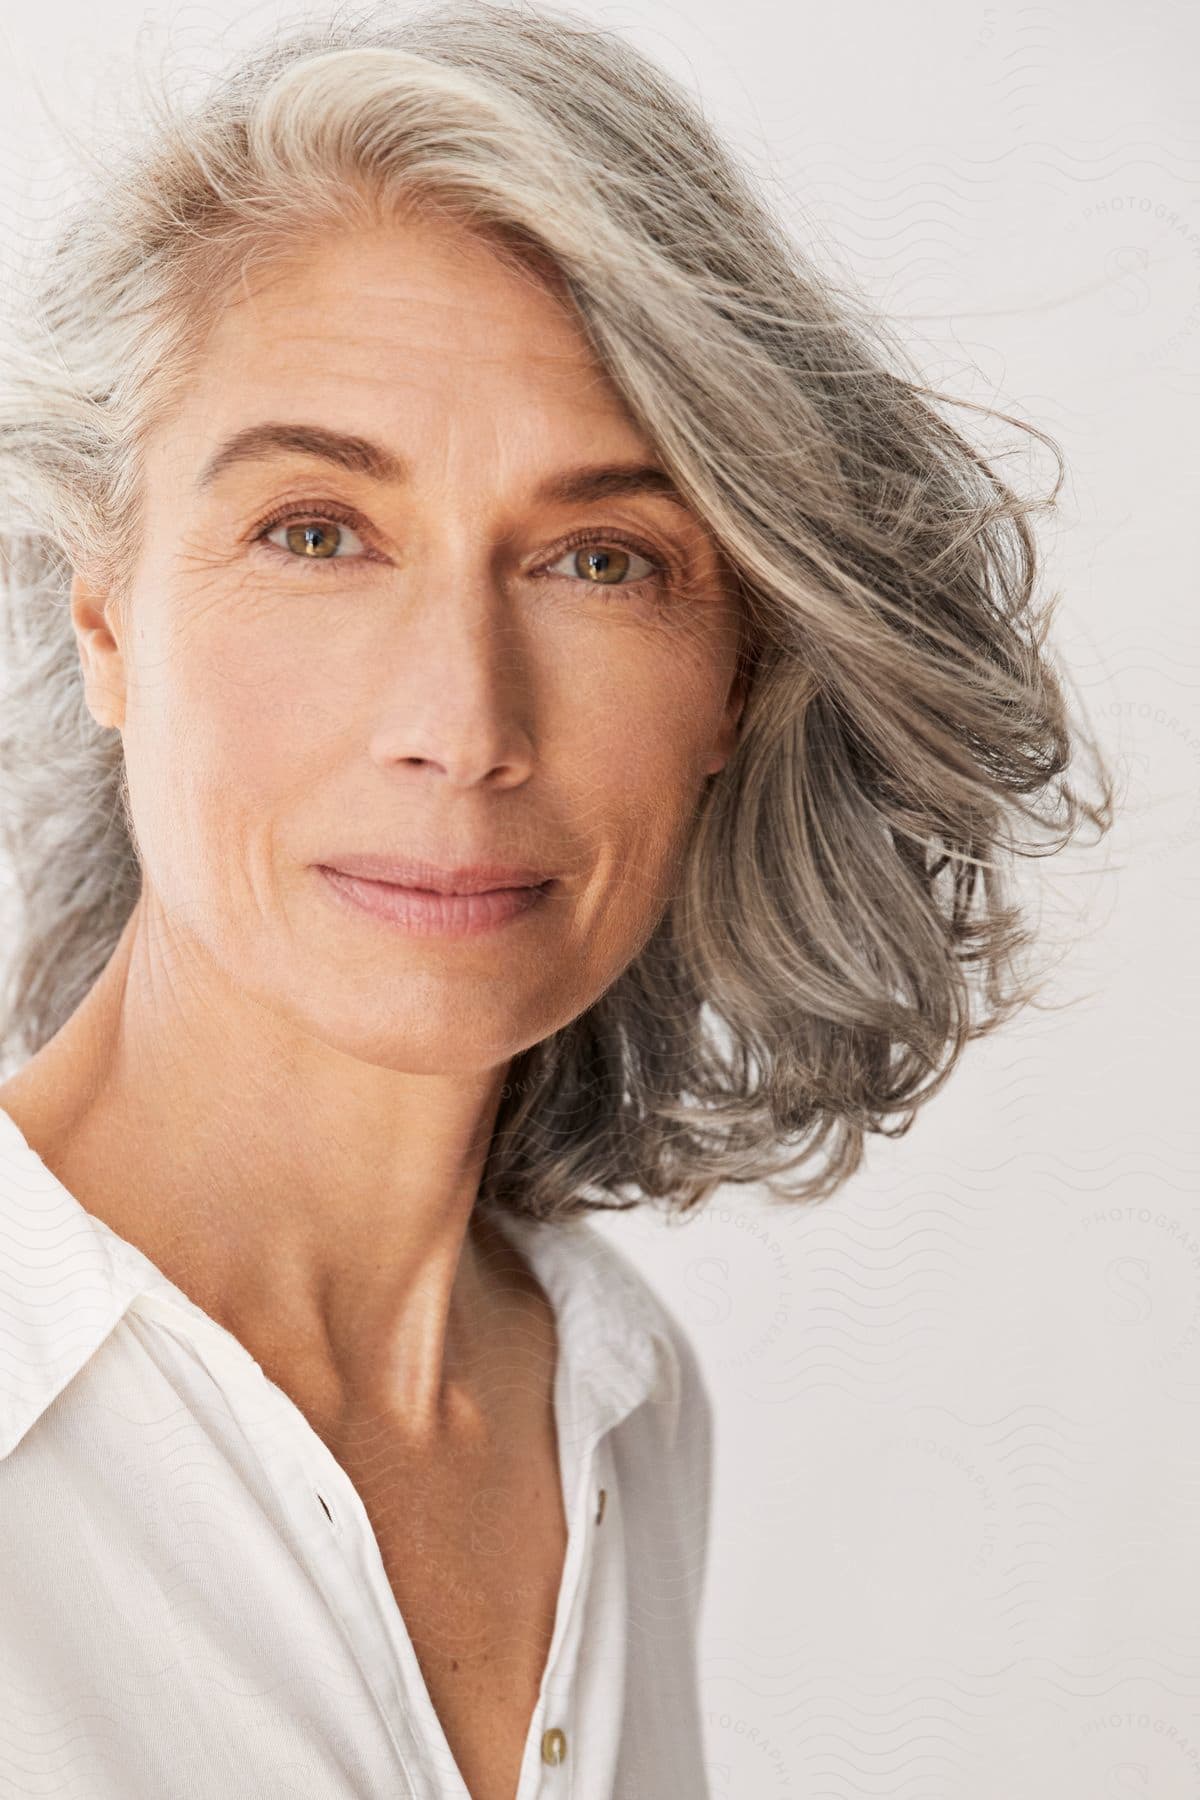 A woman with gray hair and brown eyes is looking ahead